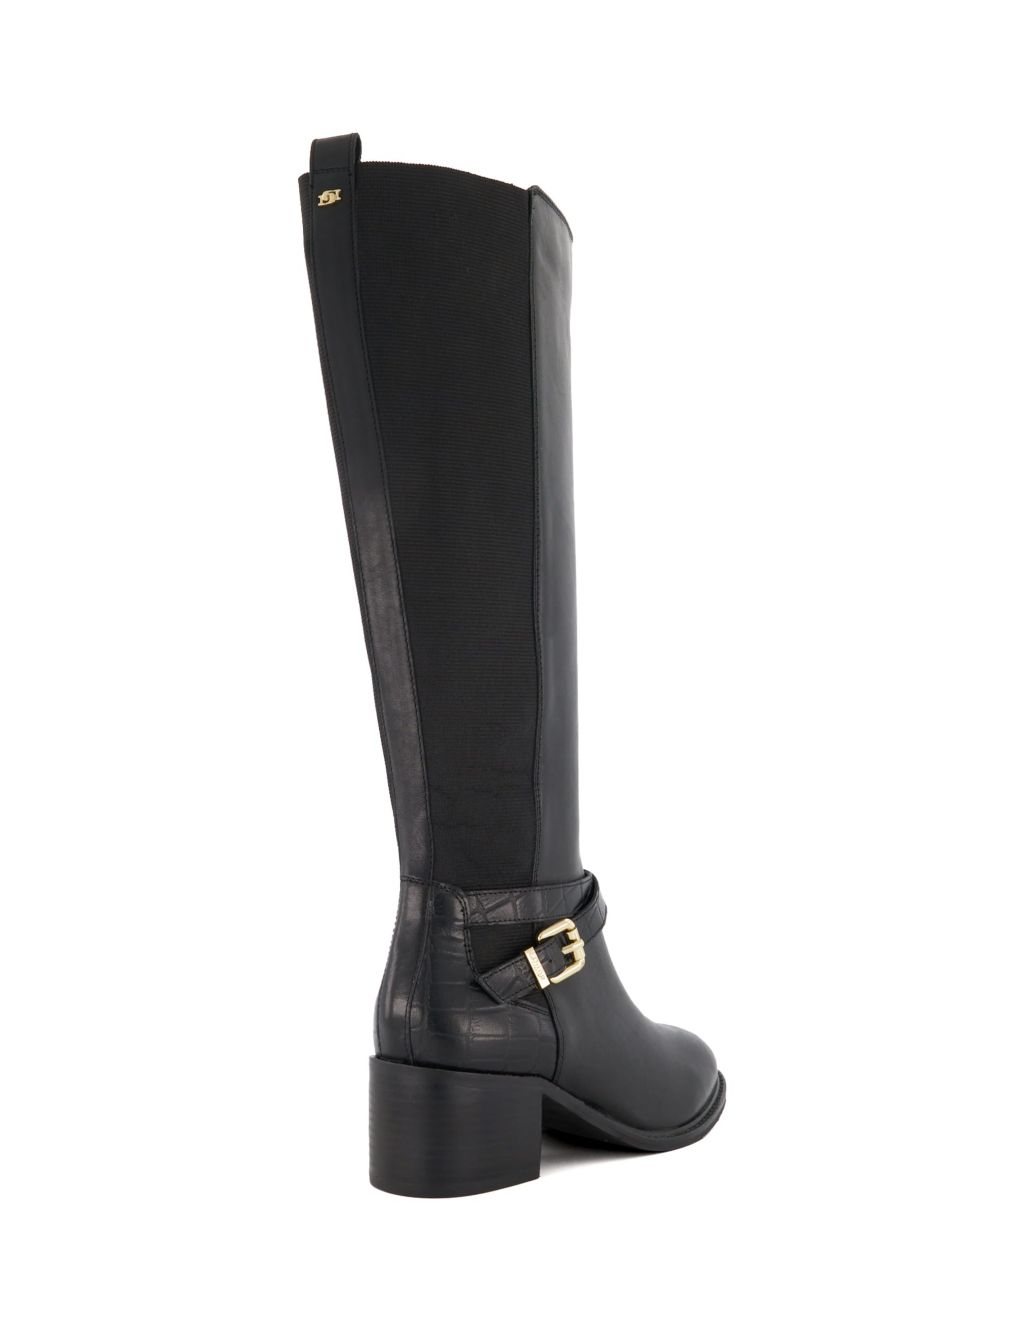 Wide Fit Leather Block Heel Knee High Boots image 3